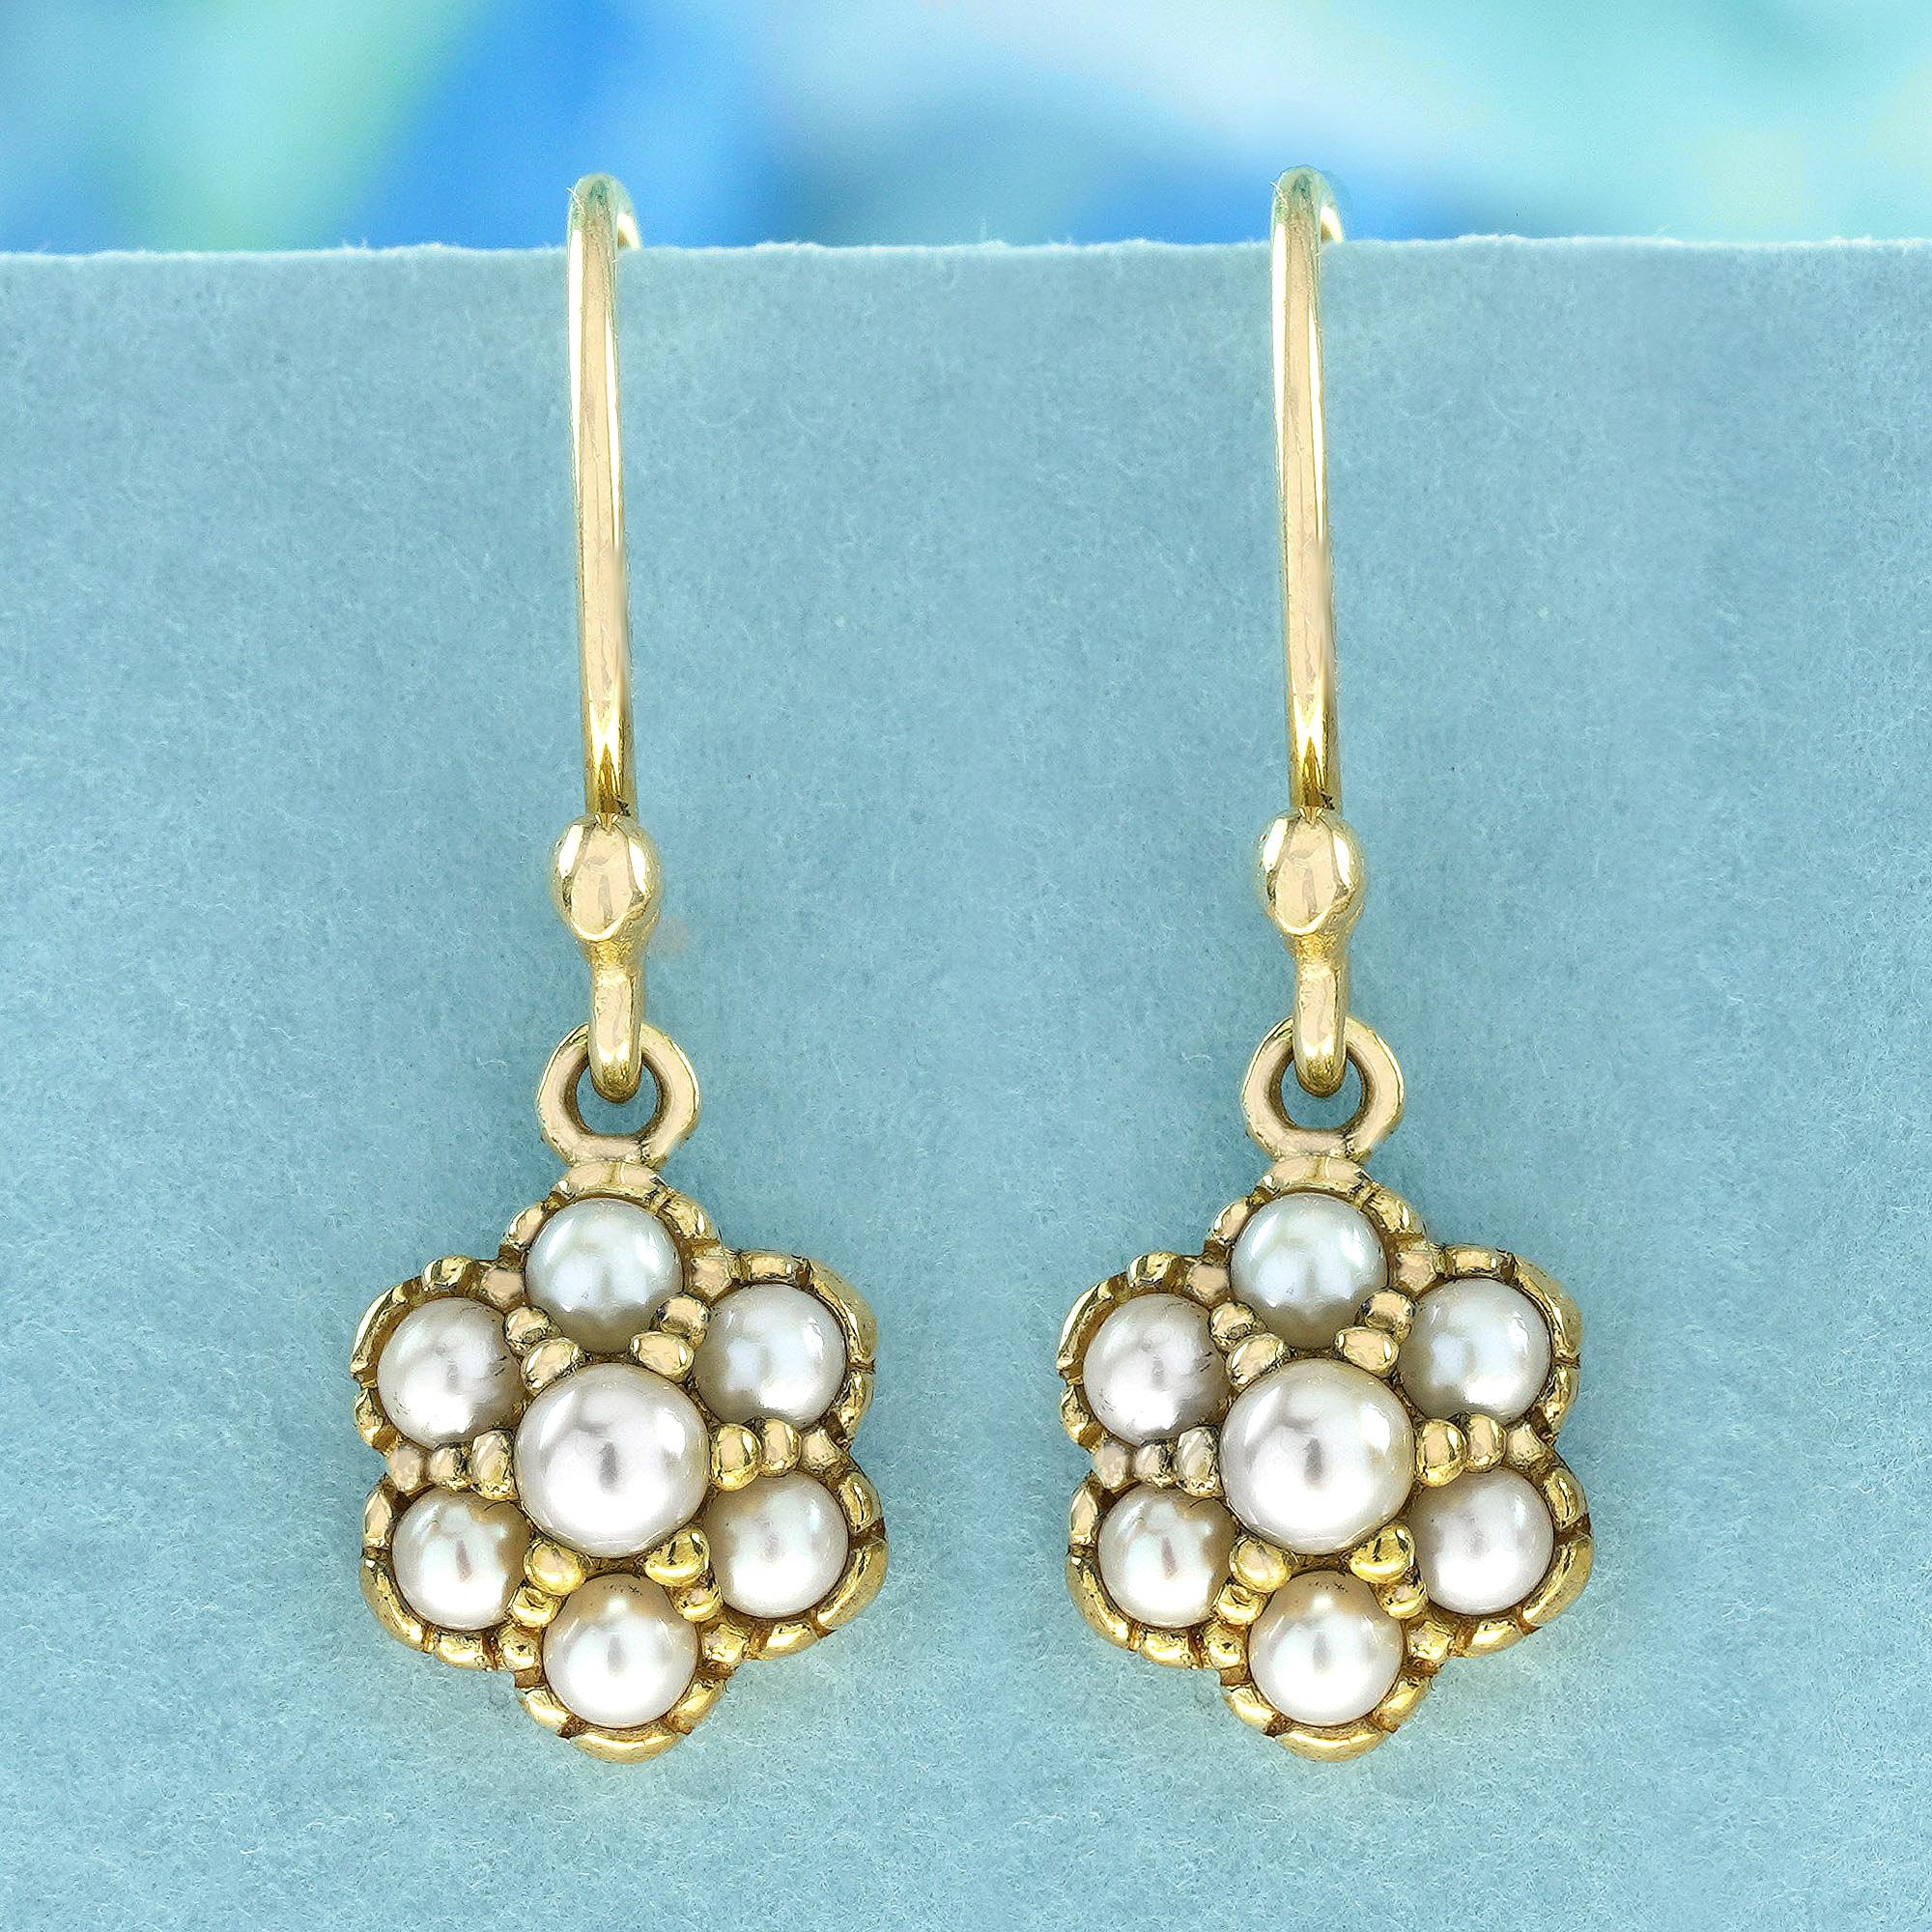 Immerse yourself in to the opulence of Vintage Victorian Style with these exquisite earrings, showcasing precious gemstones in intricate floral and nature-inspired motifs. A mesmerizing cluster design graces each earring, with lustrous pearls